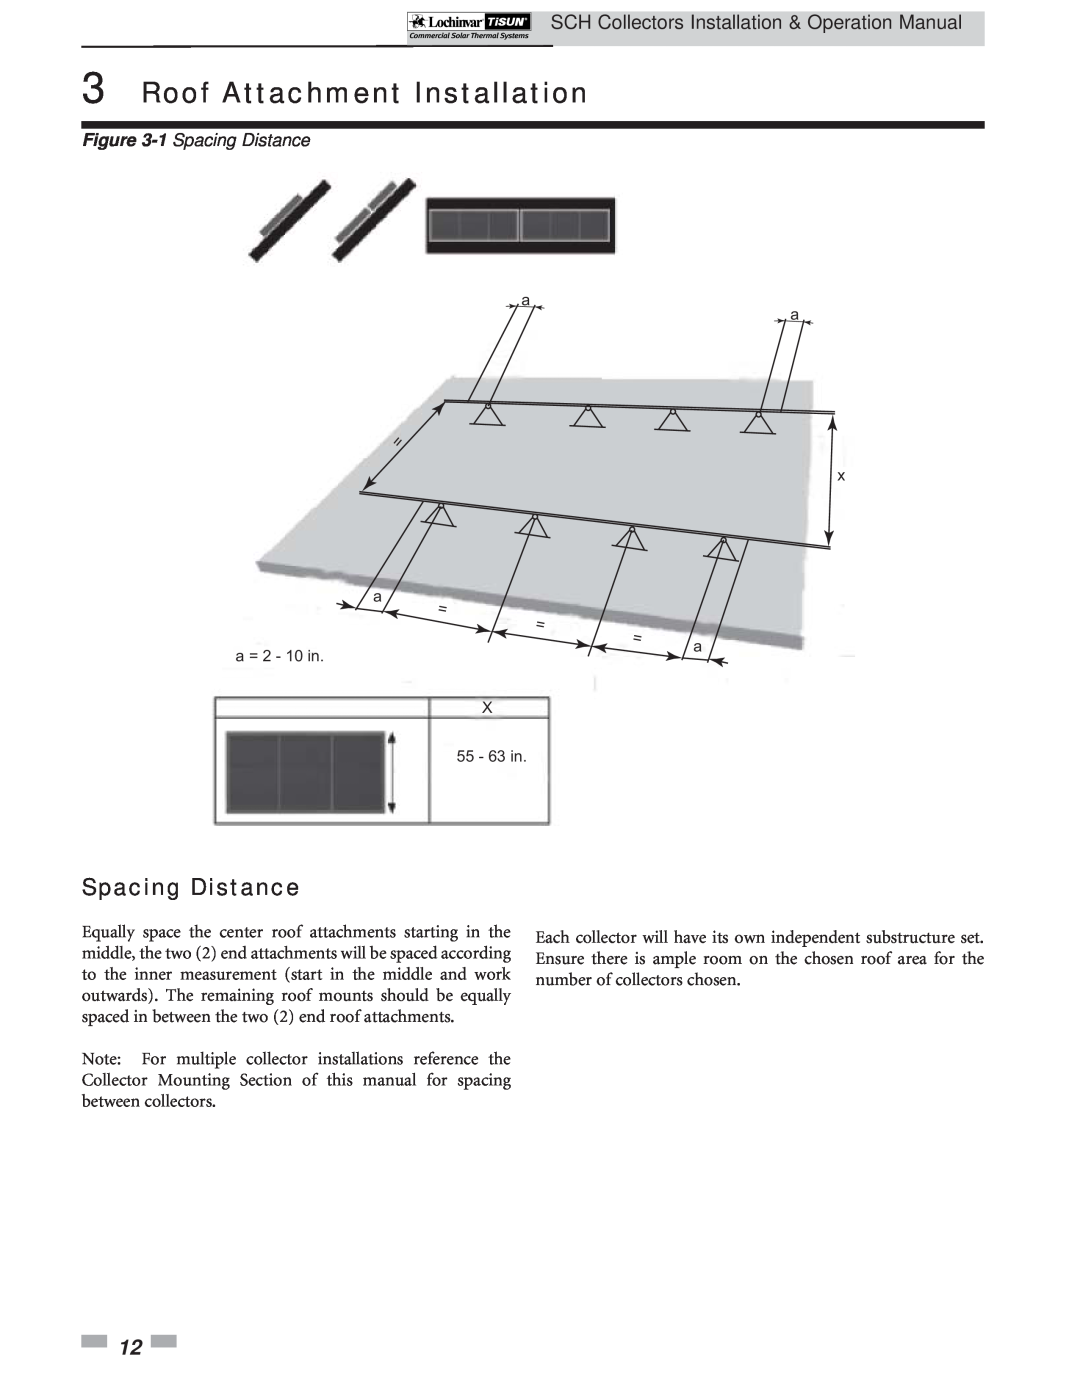 Lochinvar SCH-I-O operation manual 1 Spacing Distance, Roof Attachment Installation, = = = 